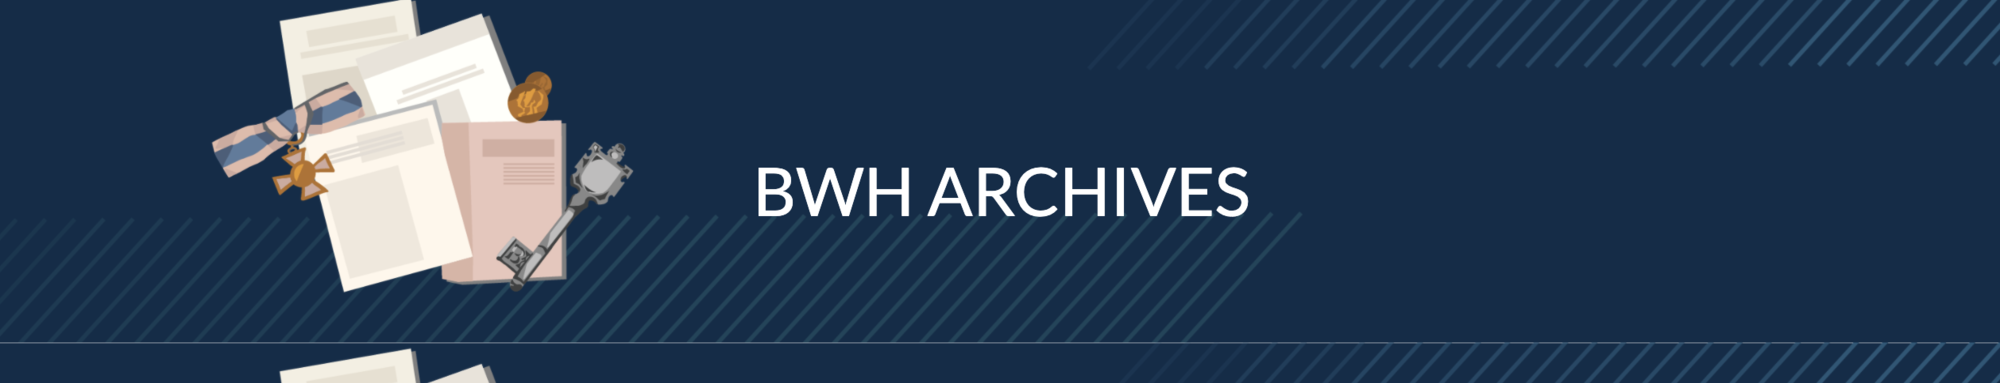 BWH Archives